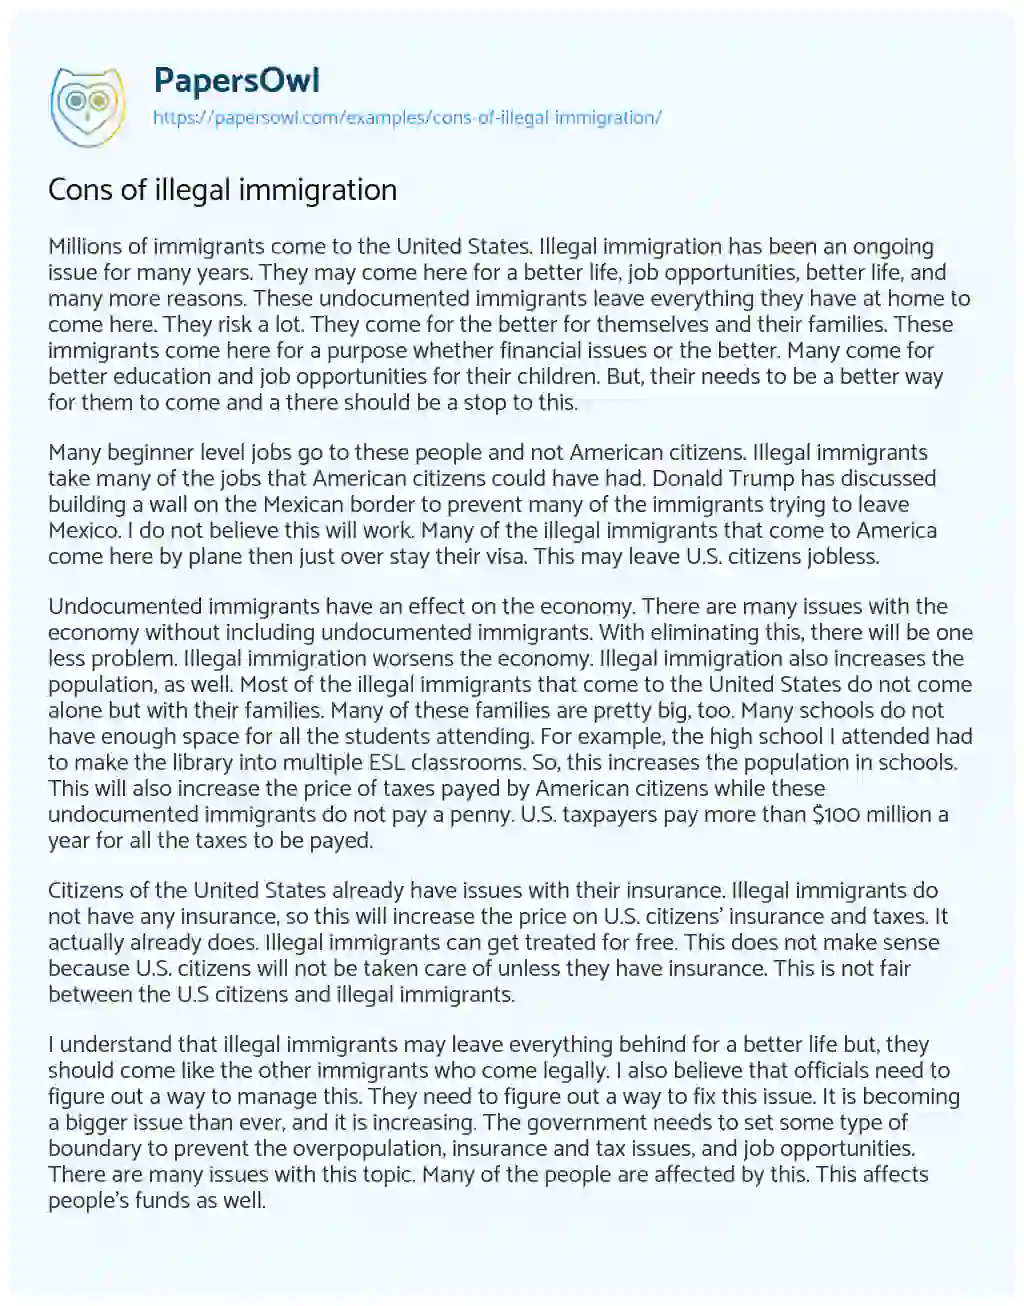 Essay on Cons of Illegal Immigration